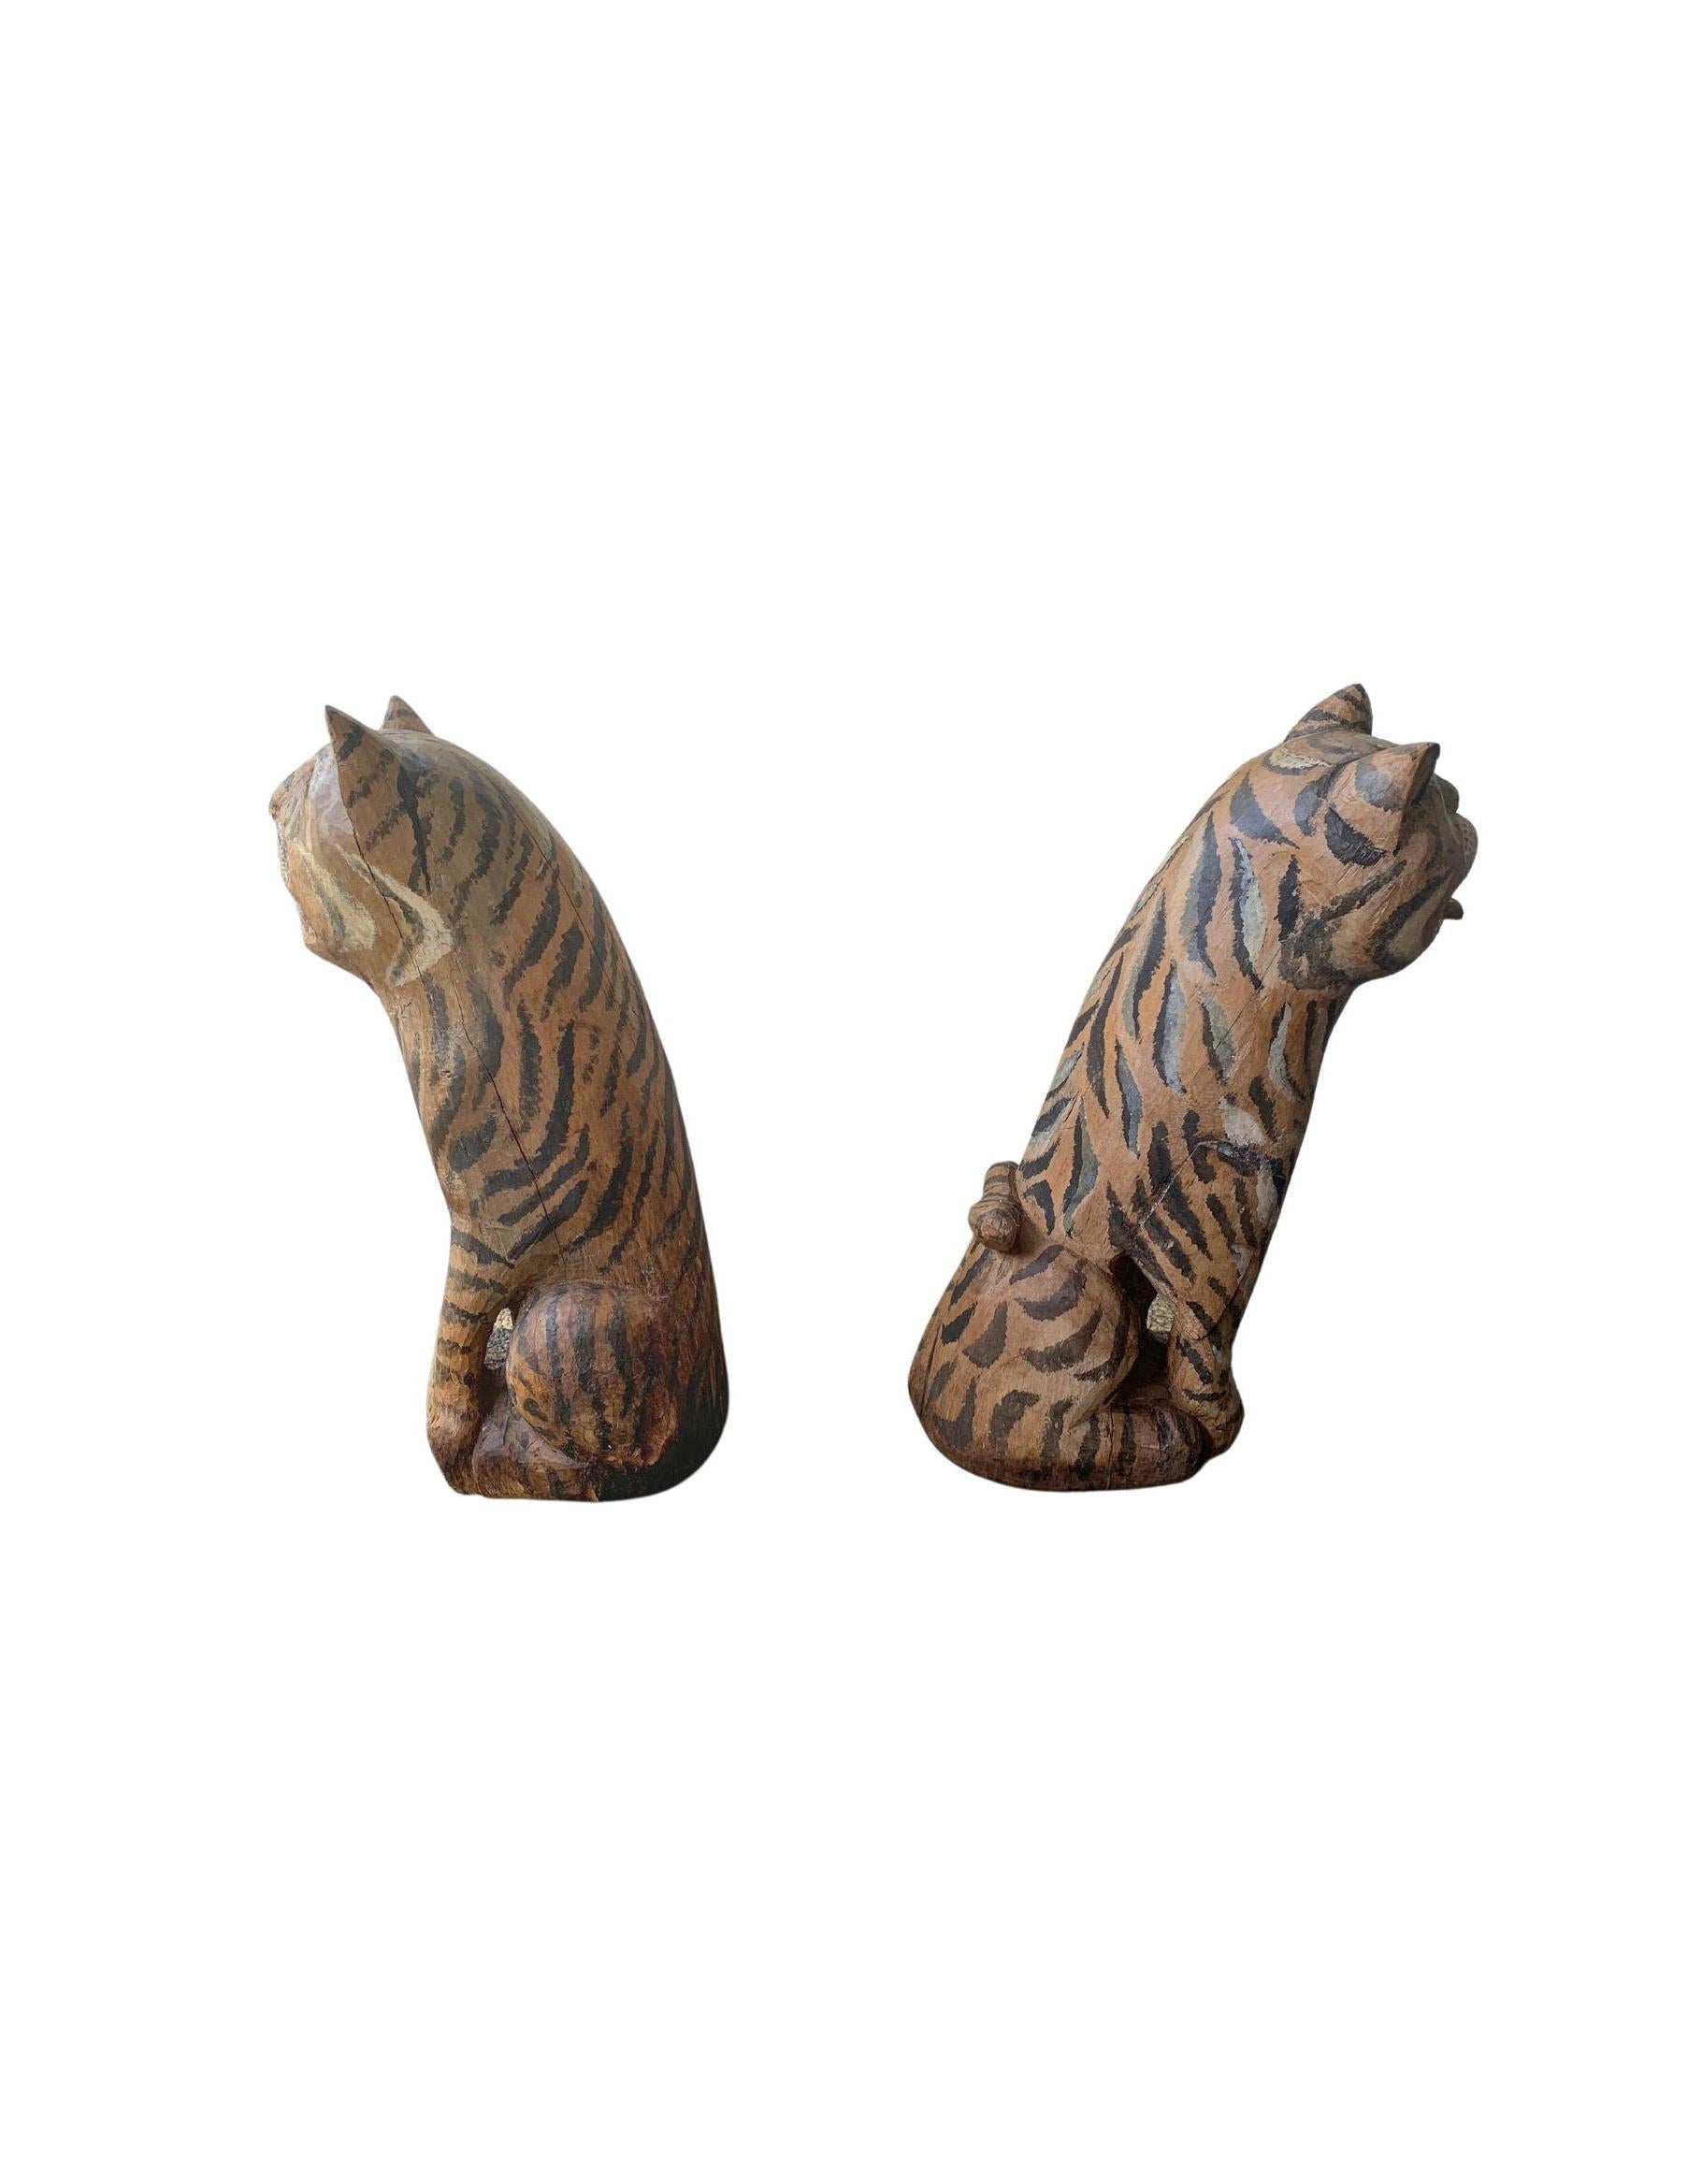 Other Pair of Vintage Hand-Crafted Tiger Sculpture / Statue from Java, Indonesia  For Sale